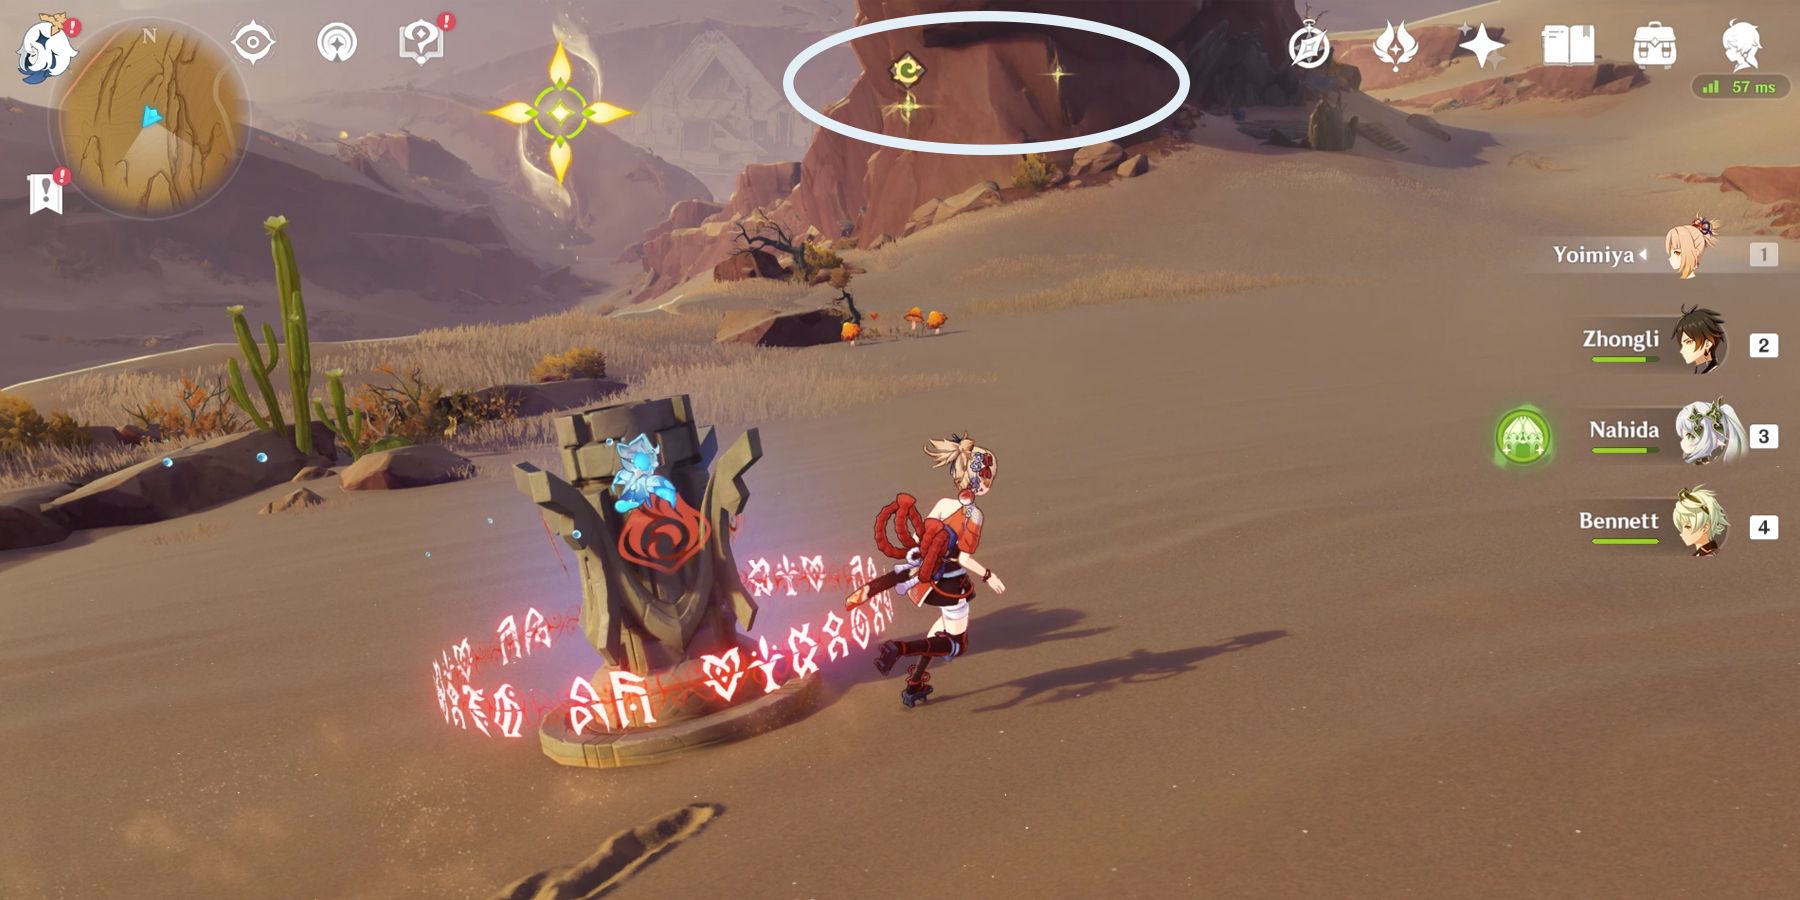 pyro elemental monument puzzle in genshin impact